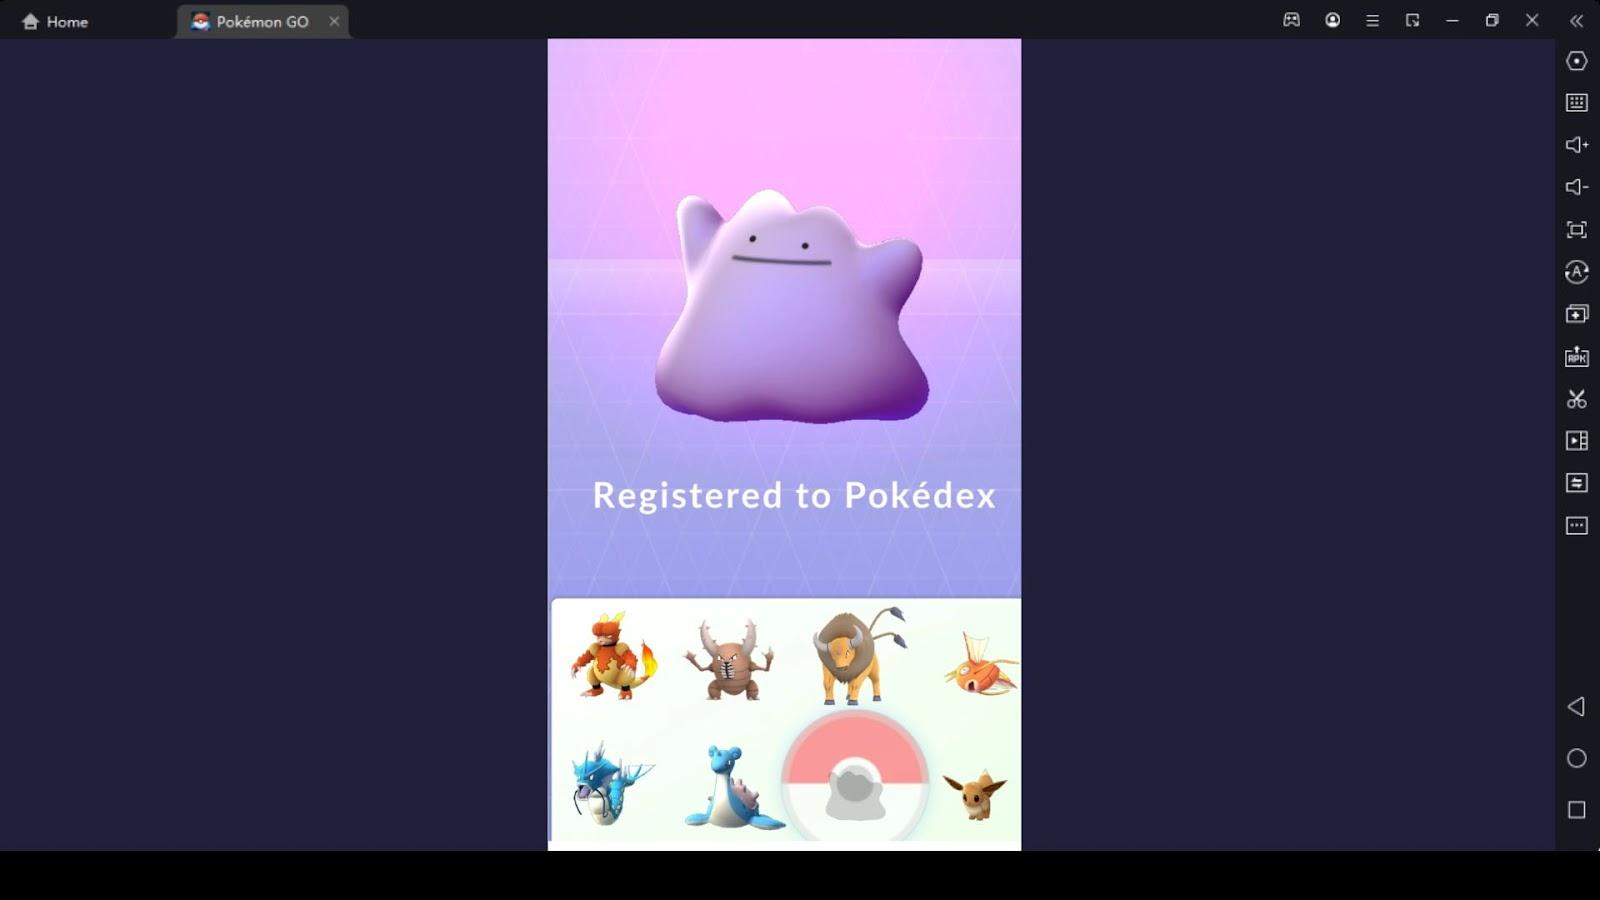 How Can You Find This Pokémon Go Ditto